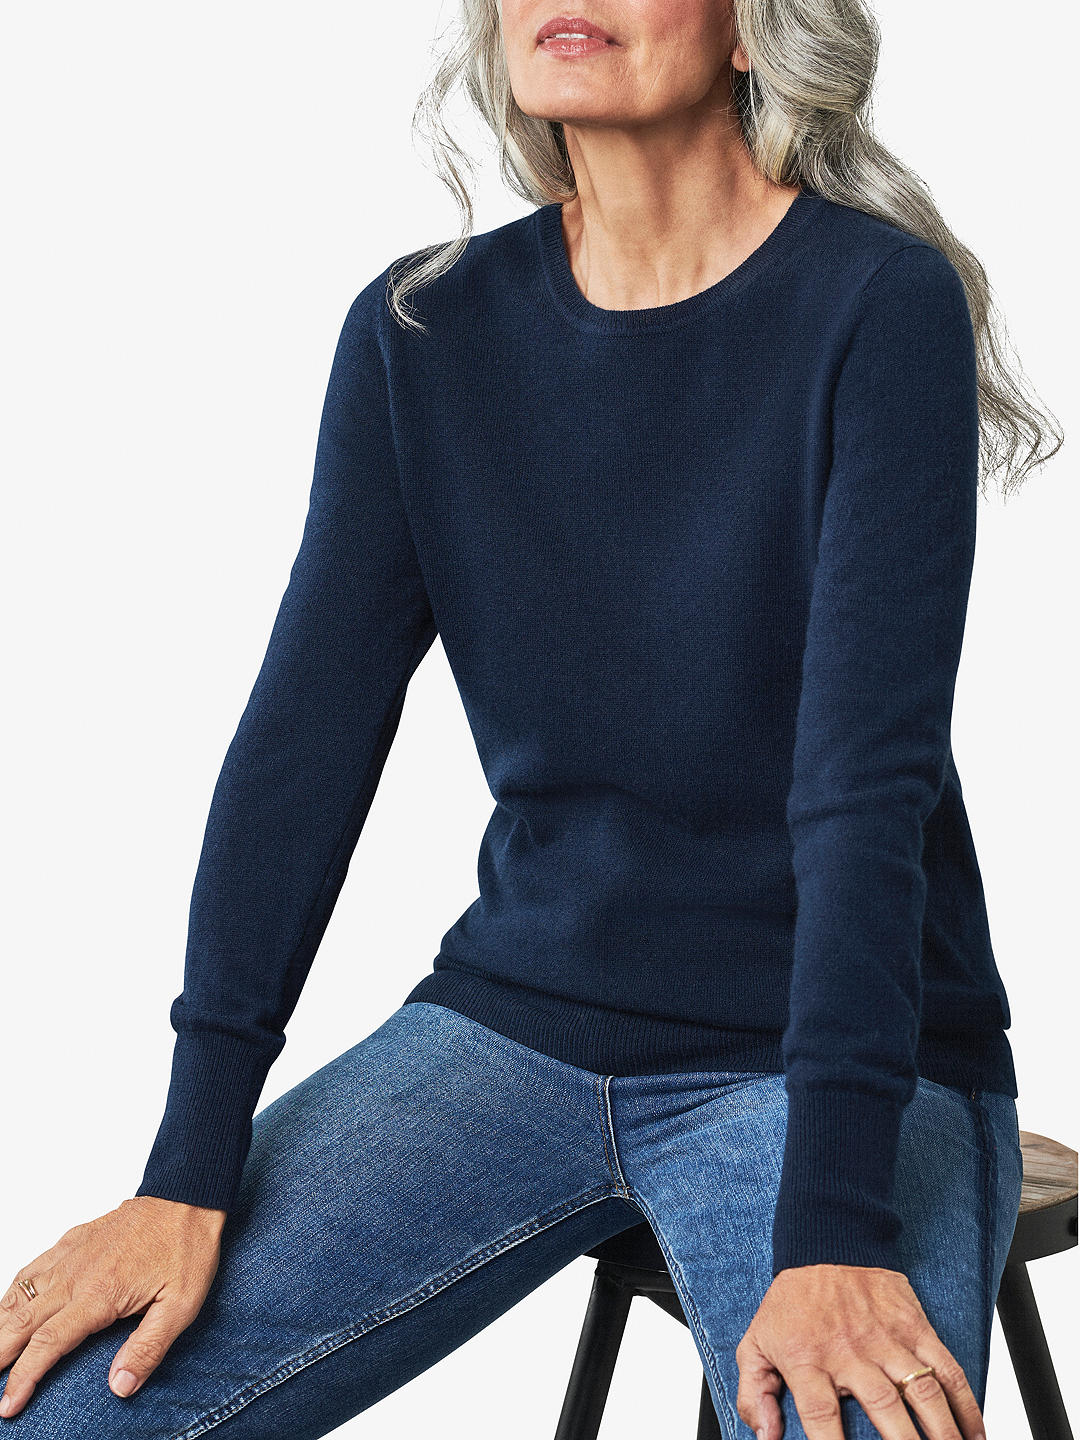 Pure Collection Cashmere Crew Neck Jumper, Navy